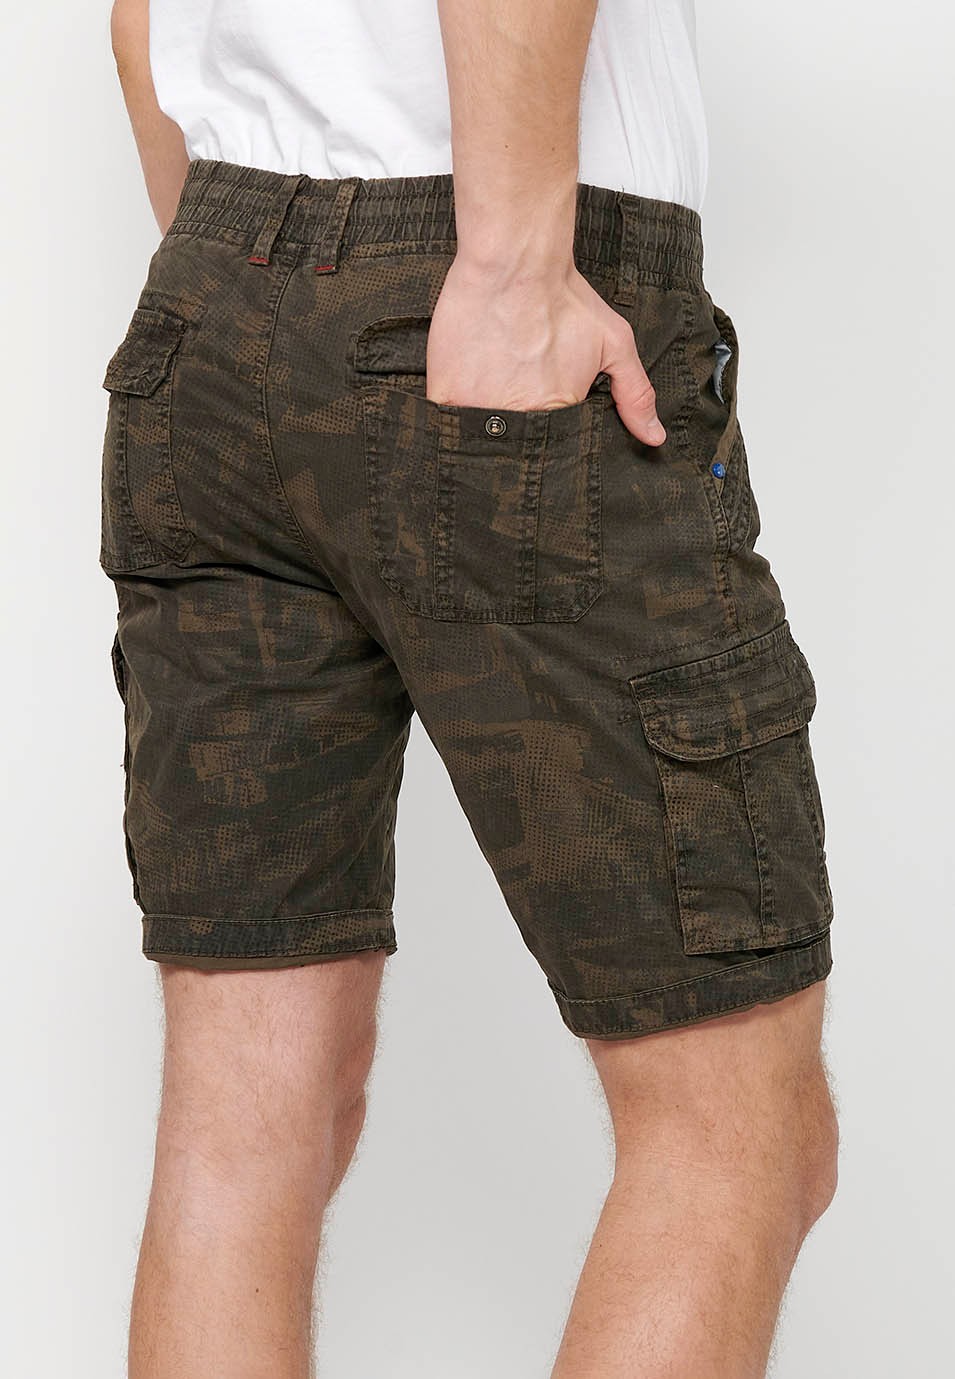 Cargo shorts with front closure with zipper and button and four pockets, two rear pockets with flap with two cargo pockets with flap and adjustable waist with drawstring in Khaki color for men 4